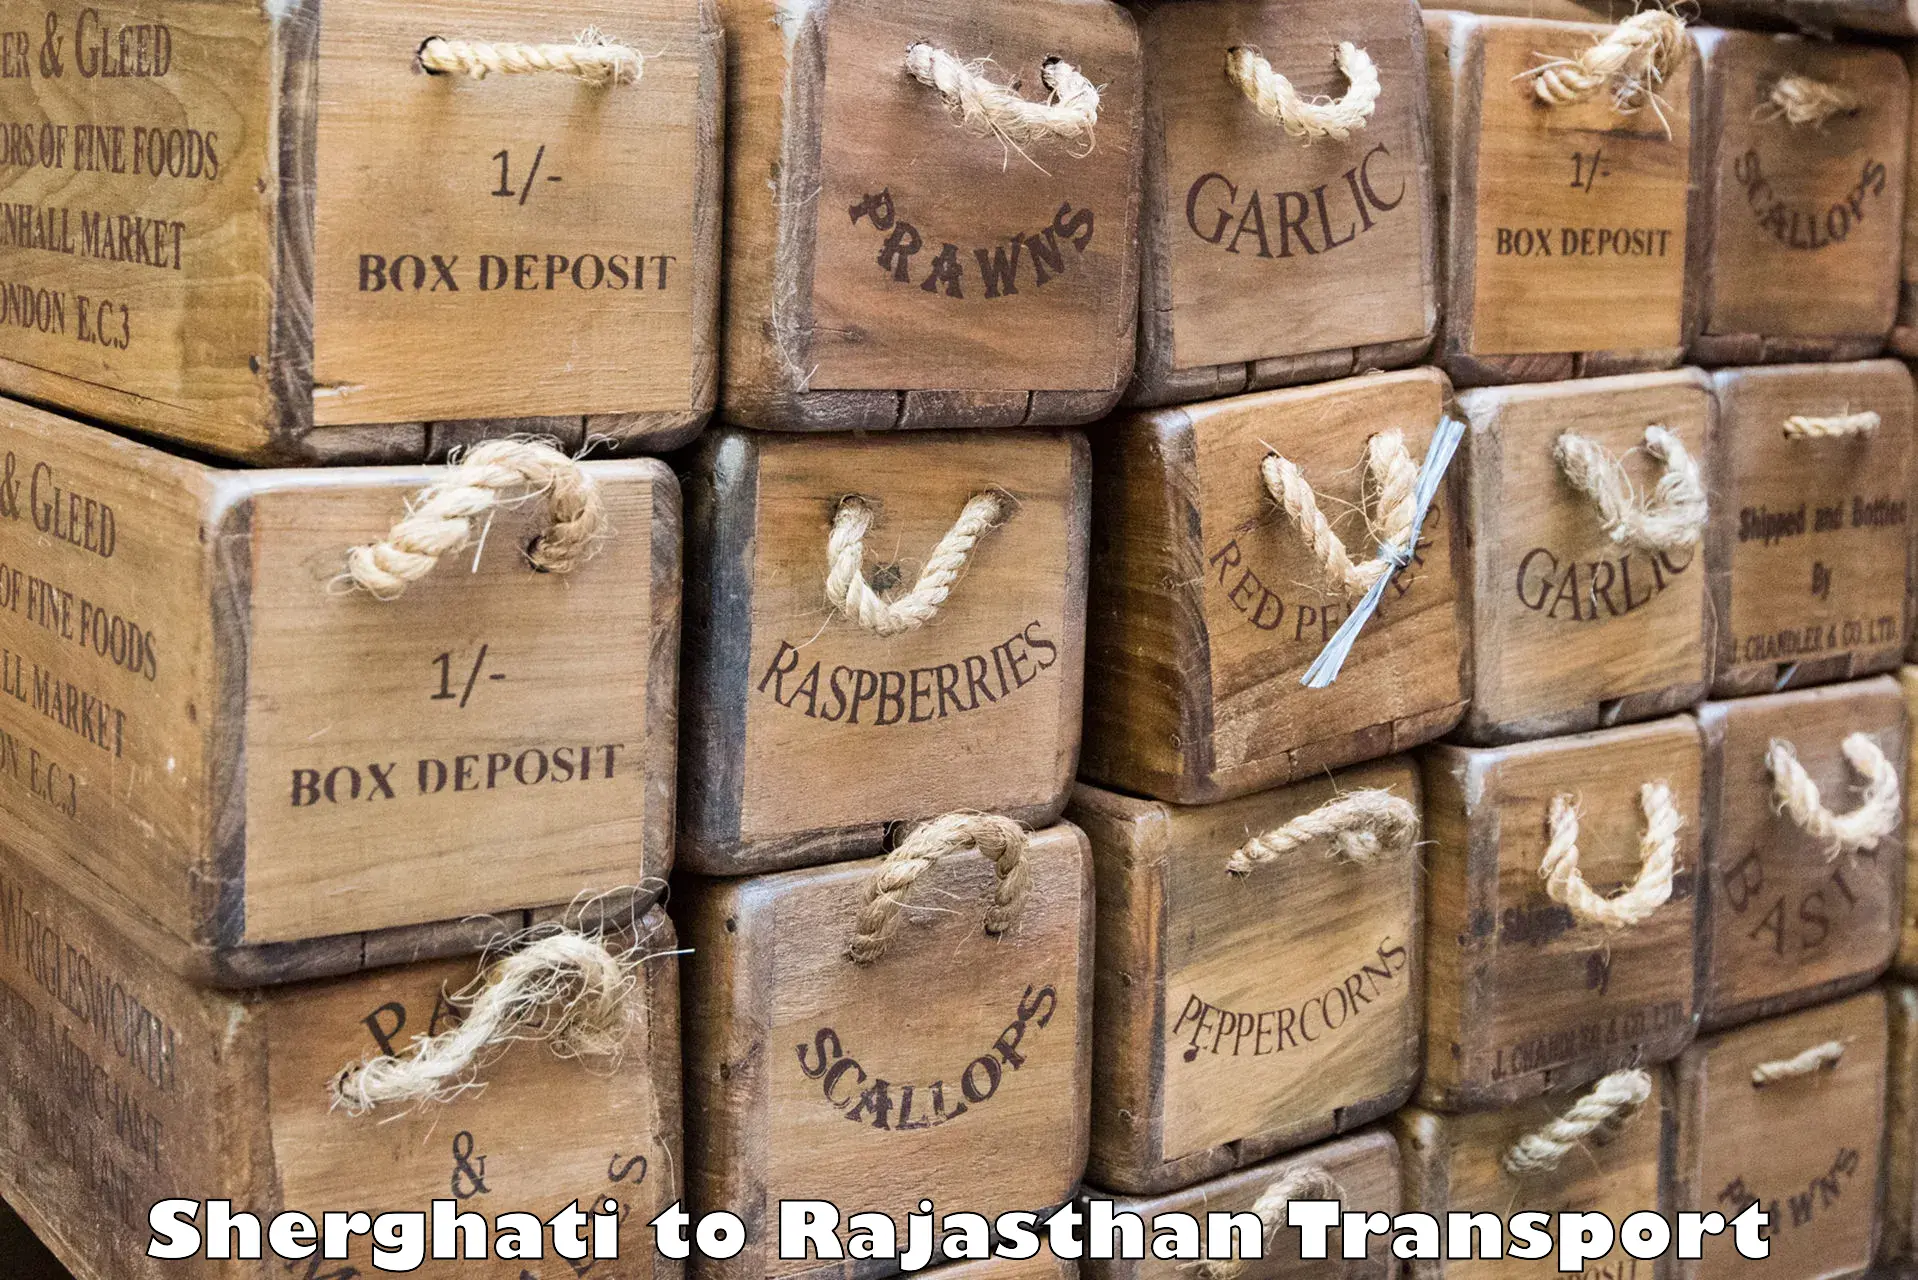 Container transport service Sherghati to Pokhran